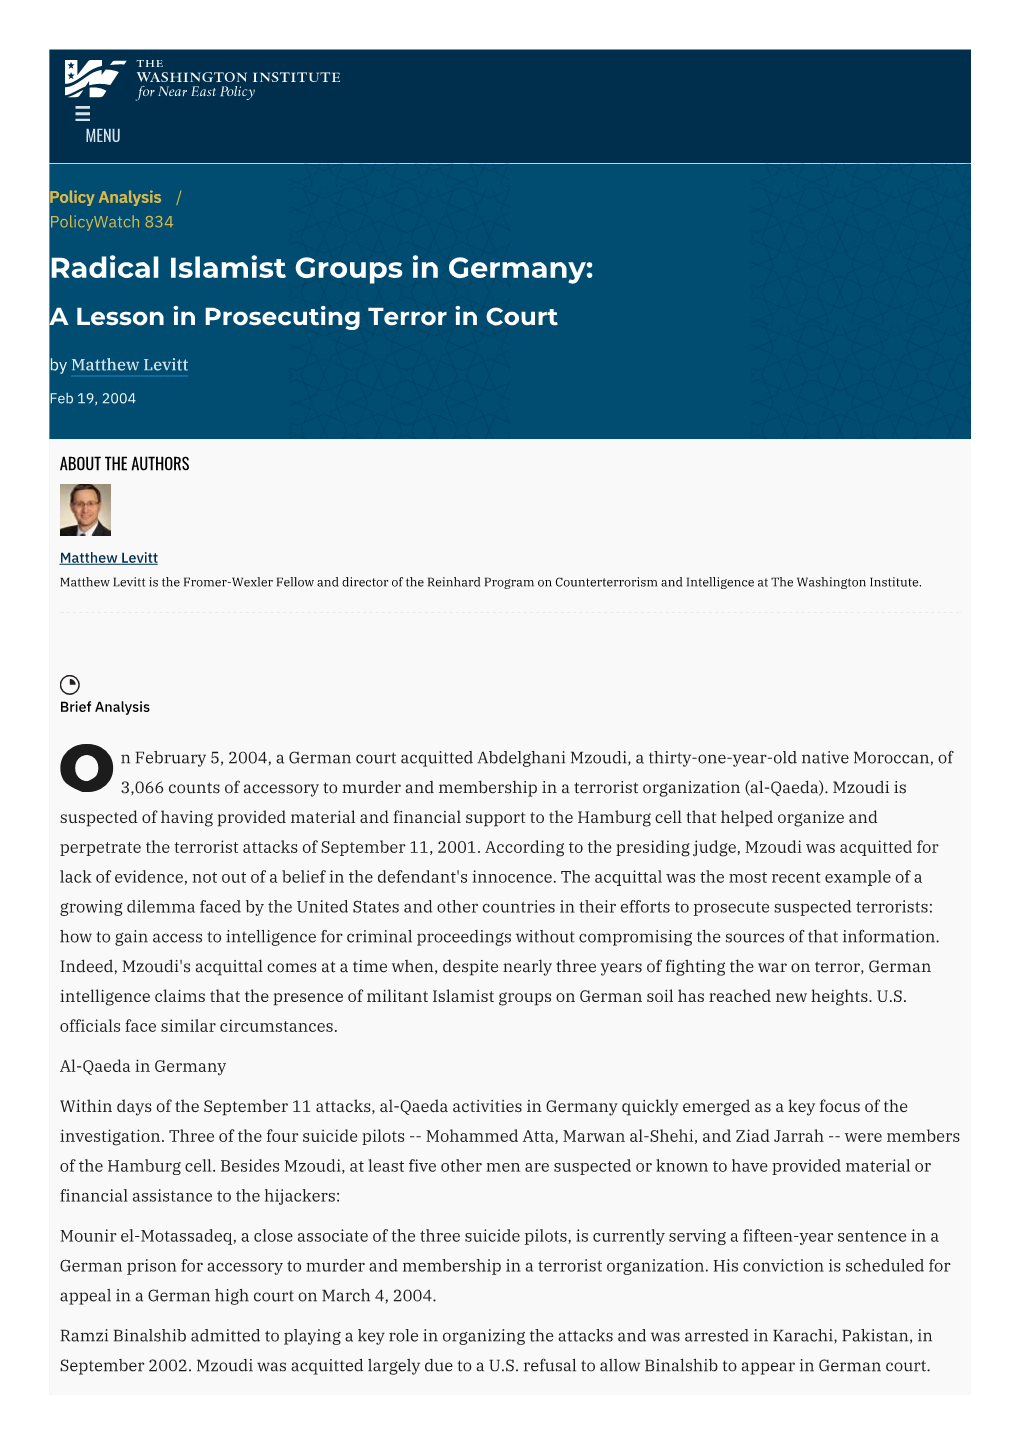 Radical Islamist Groups in Germany: a Lesson in Prosecuting Terror in Court by Matthew Levitt